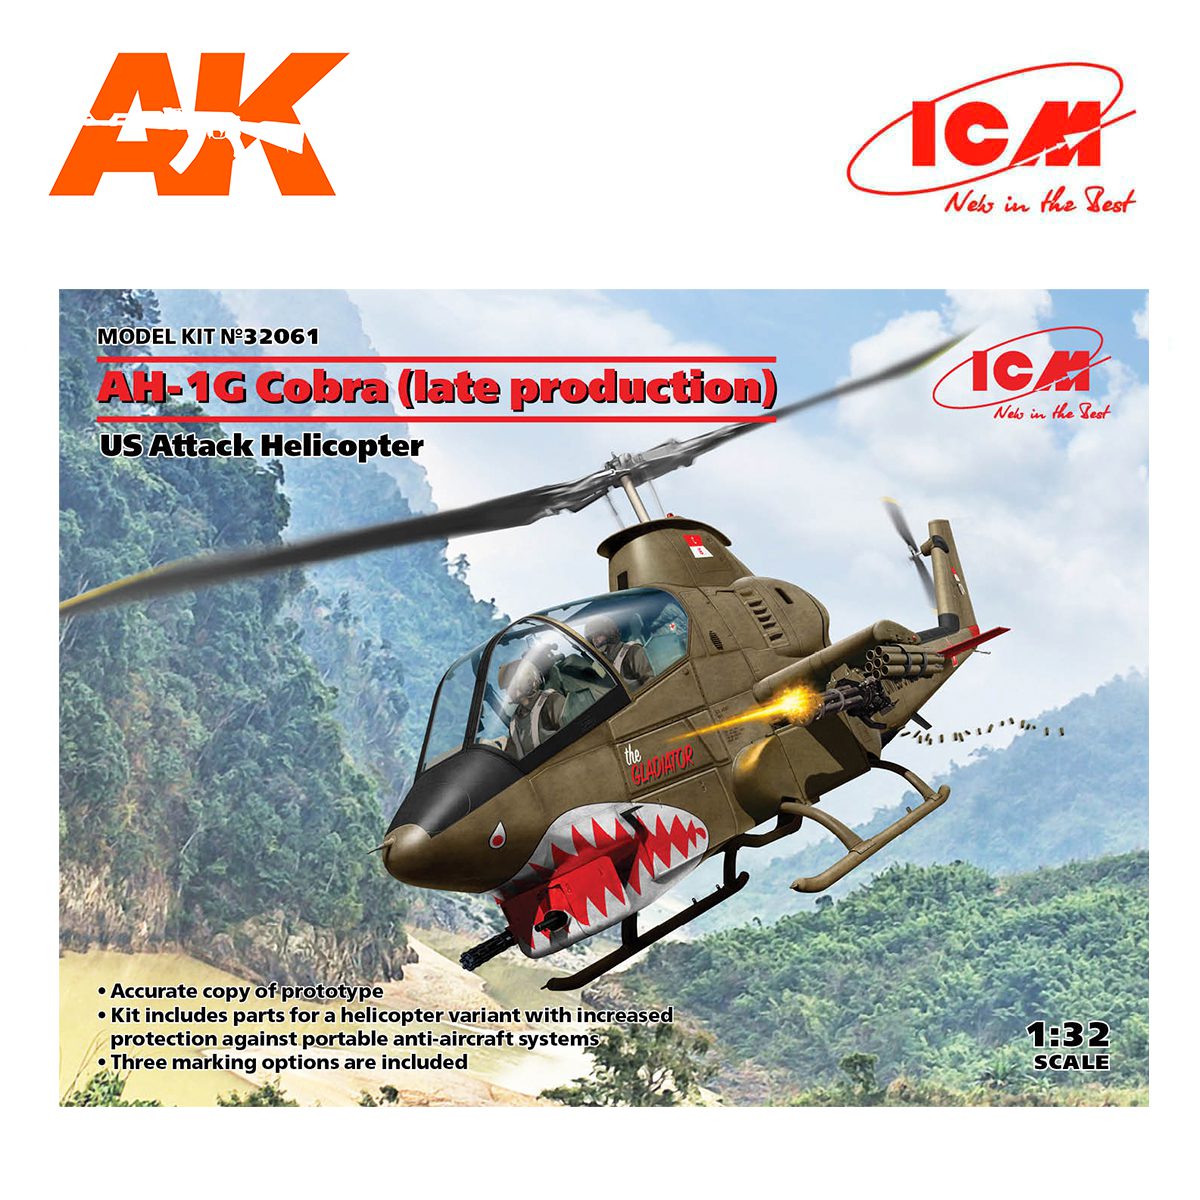 AH-1G Cobra (late production), US Attack Helicopter 1/32